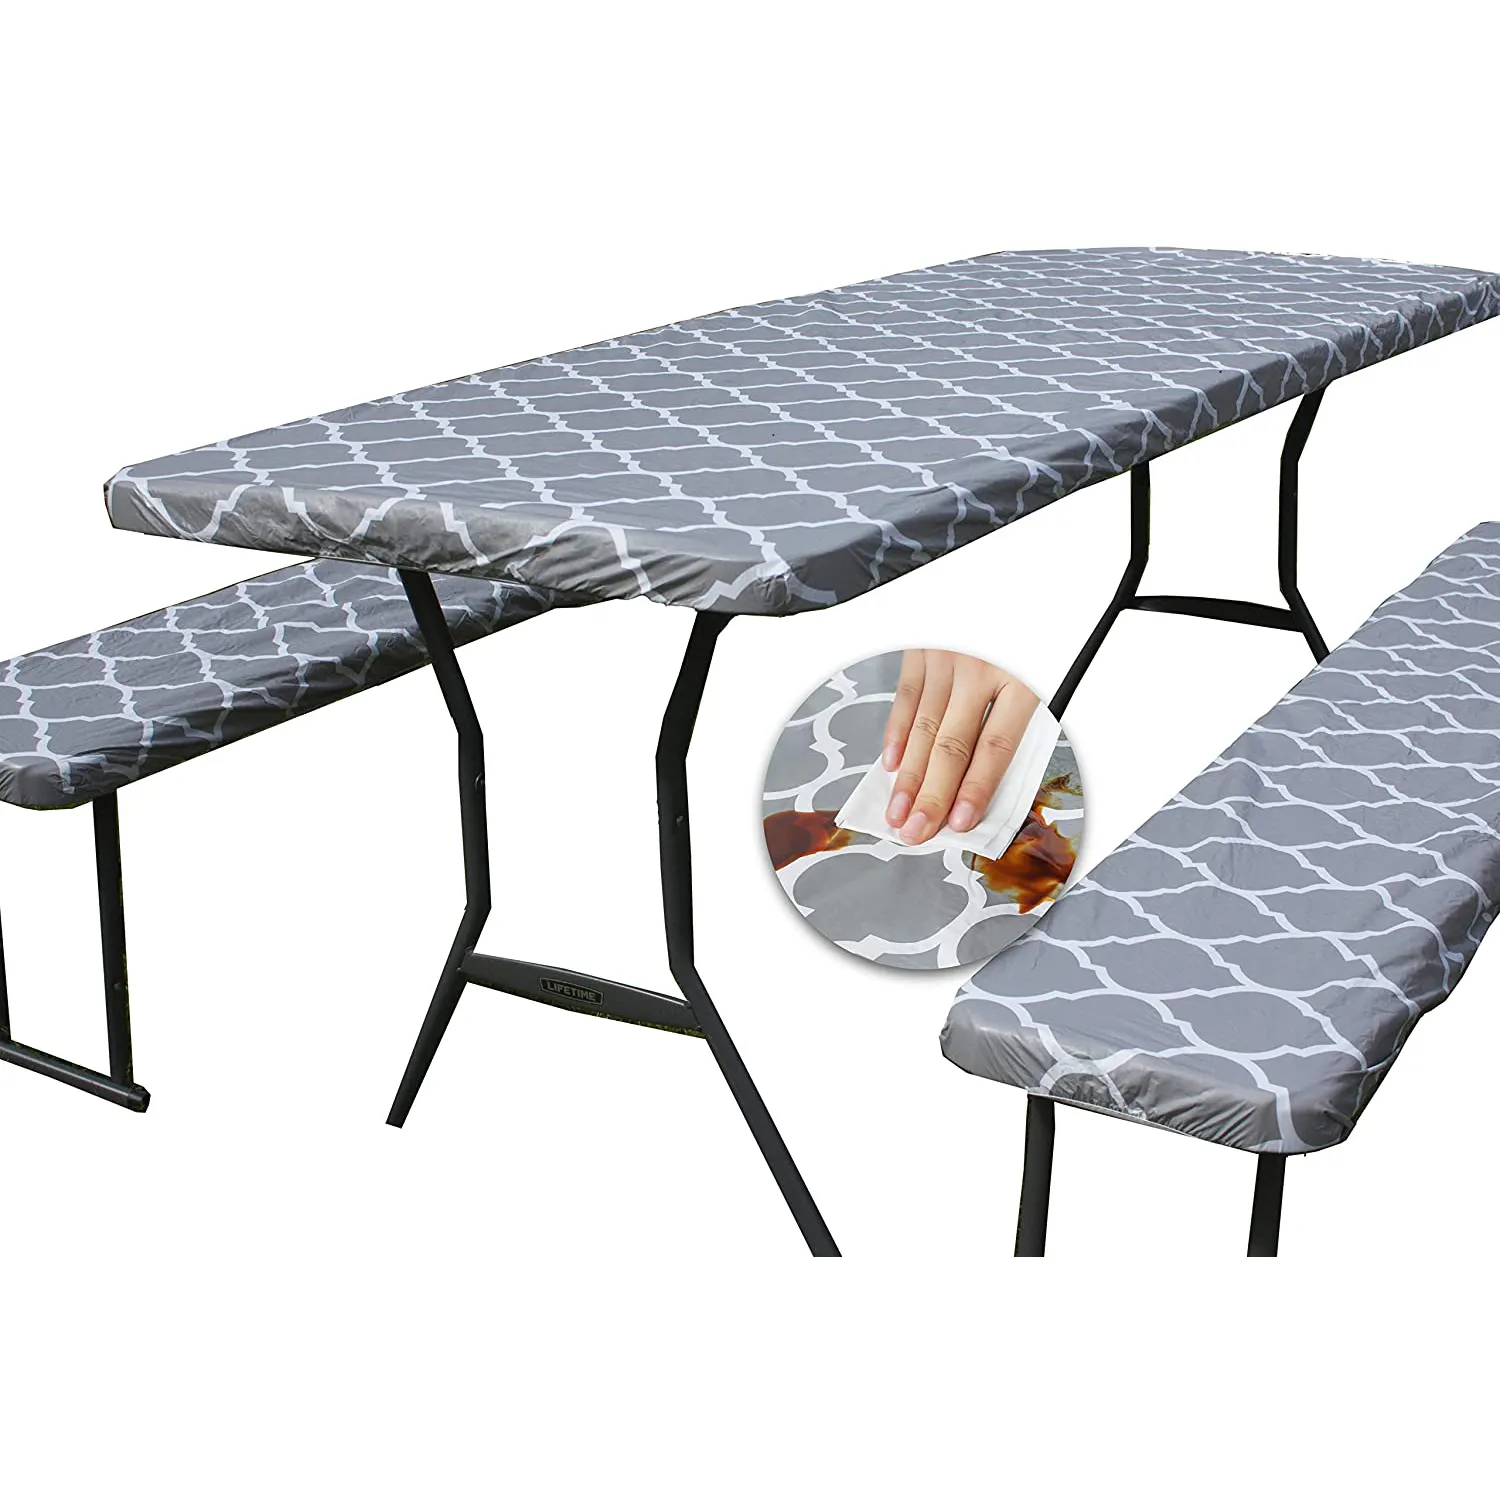 Rectangular Fitted Gray Trellis Pattern Plastic Camping Picnic Waterproof Vinyl Tablecloth for Folding Table Benches 3pcs Set